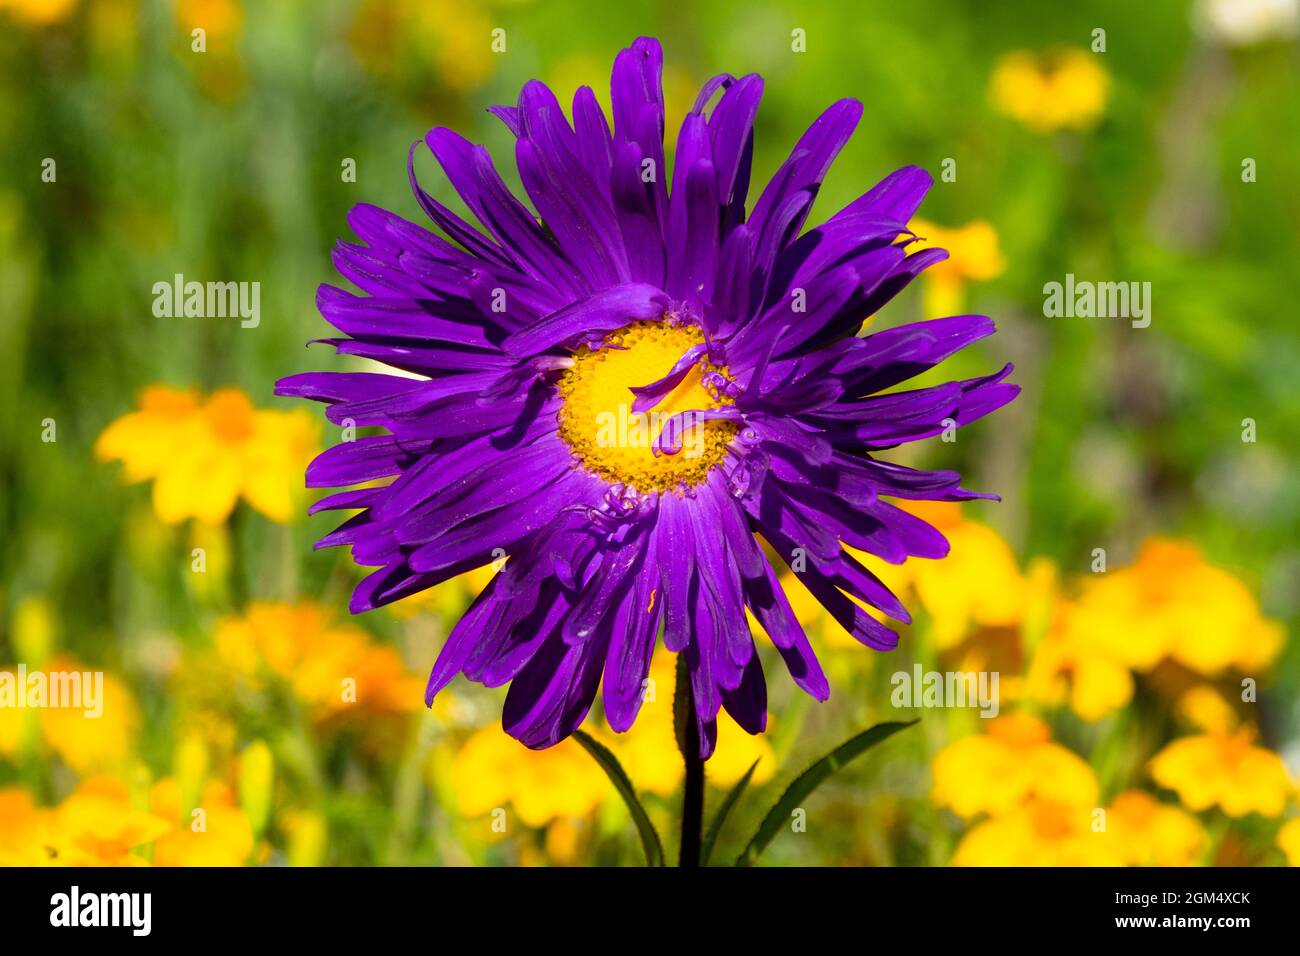 Blue-yellow flower background, Aster Stock Photo